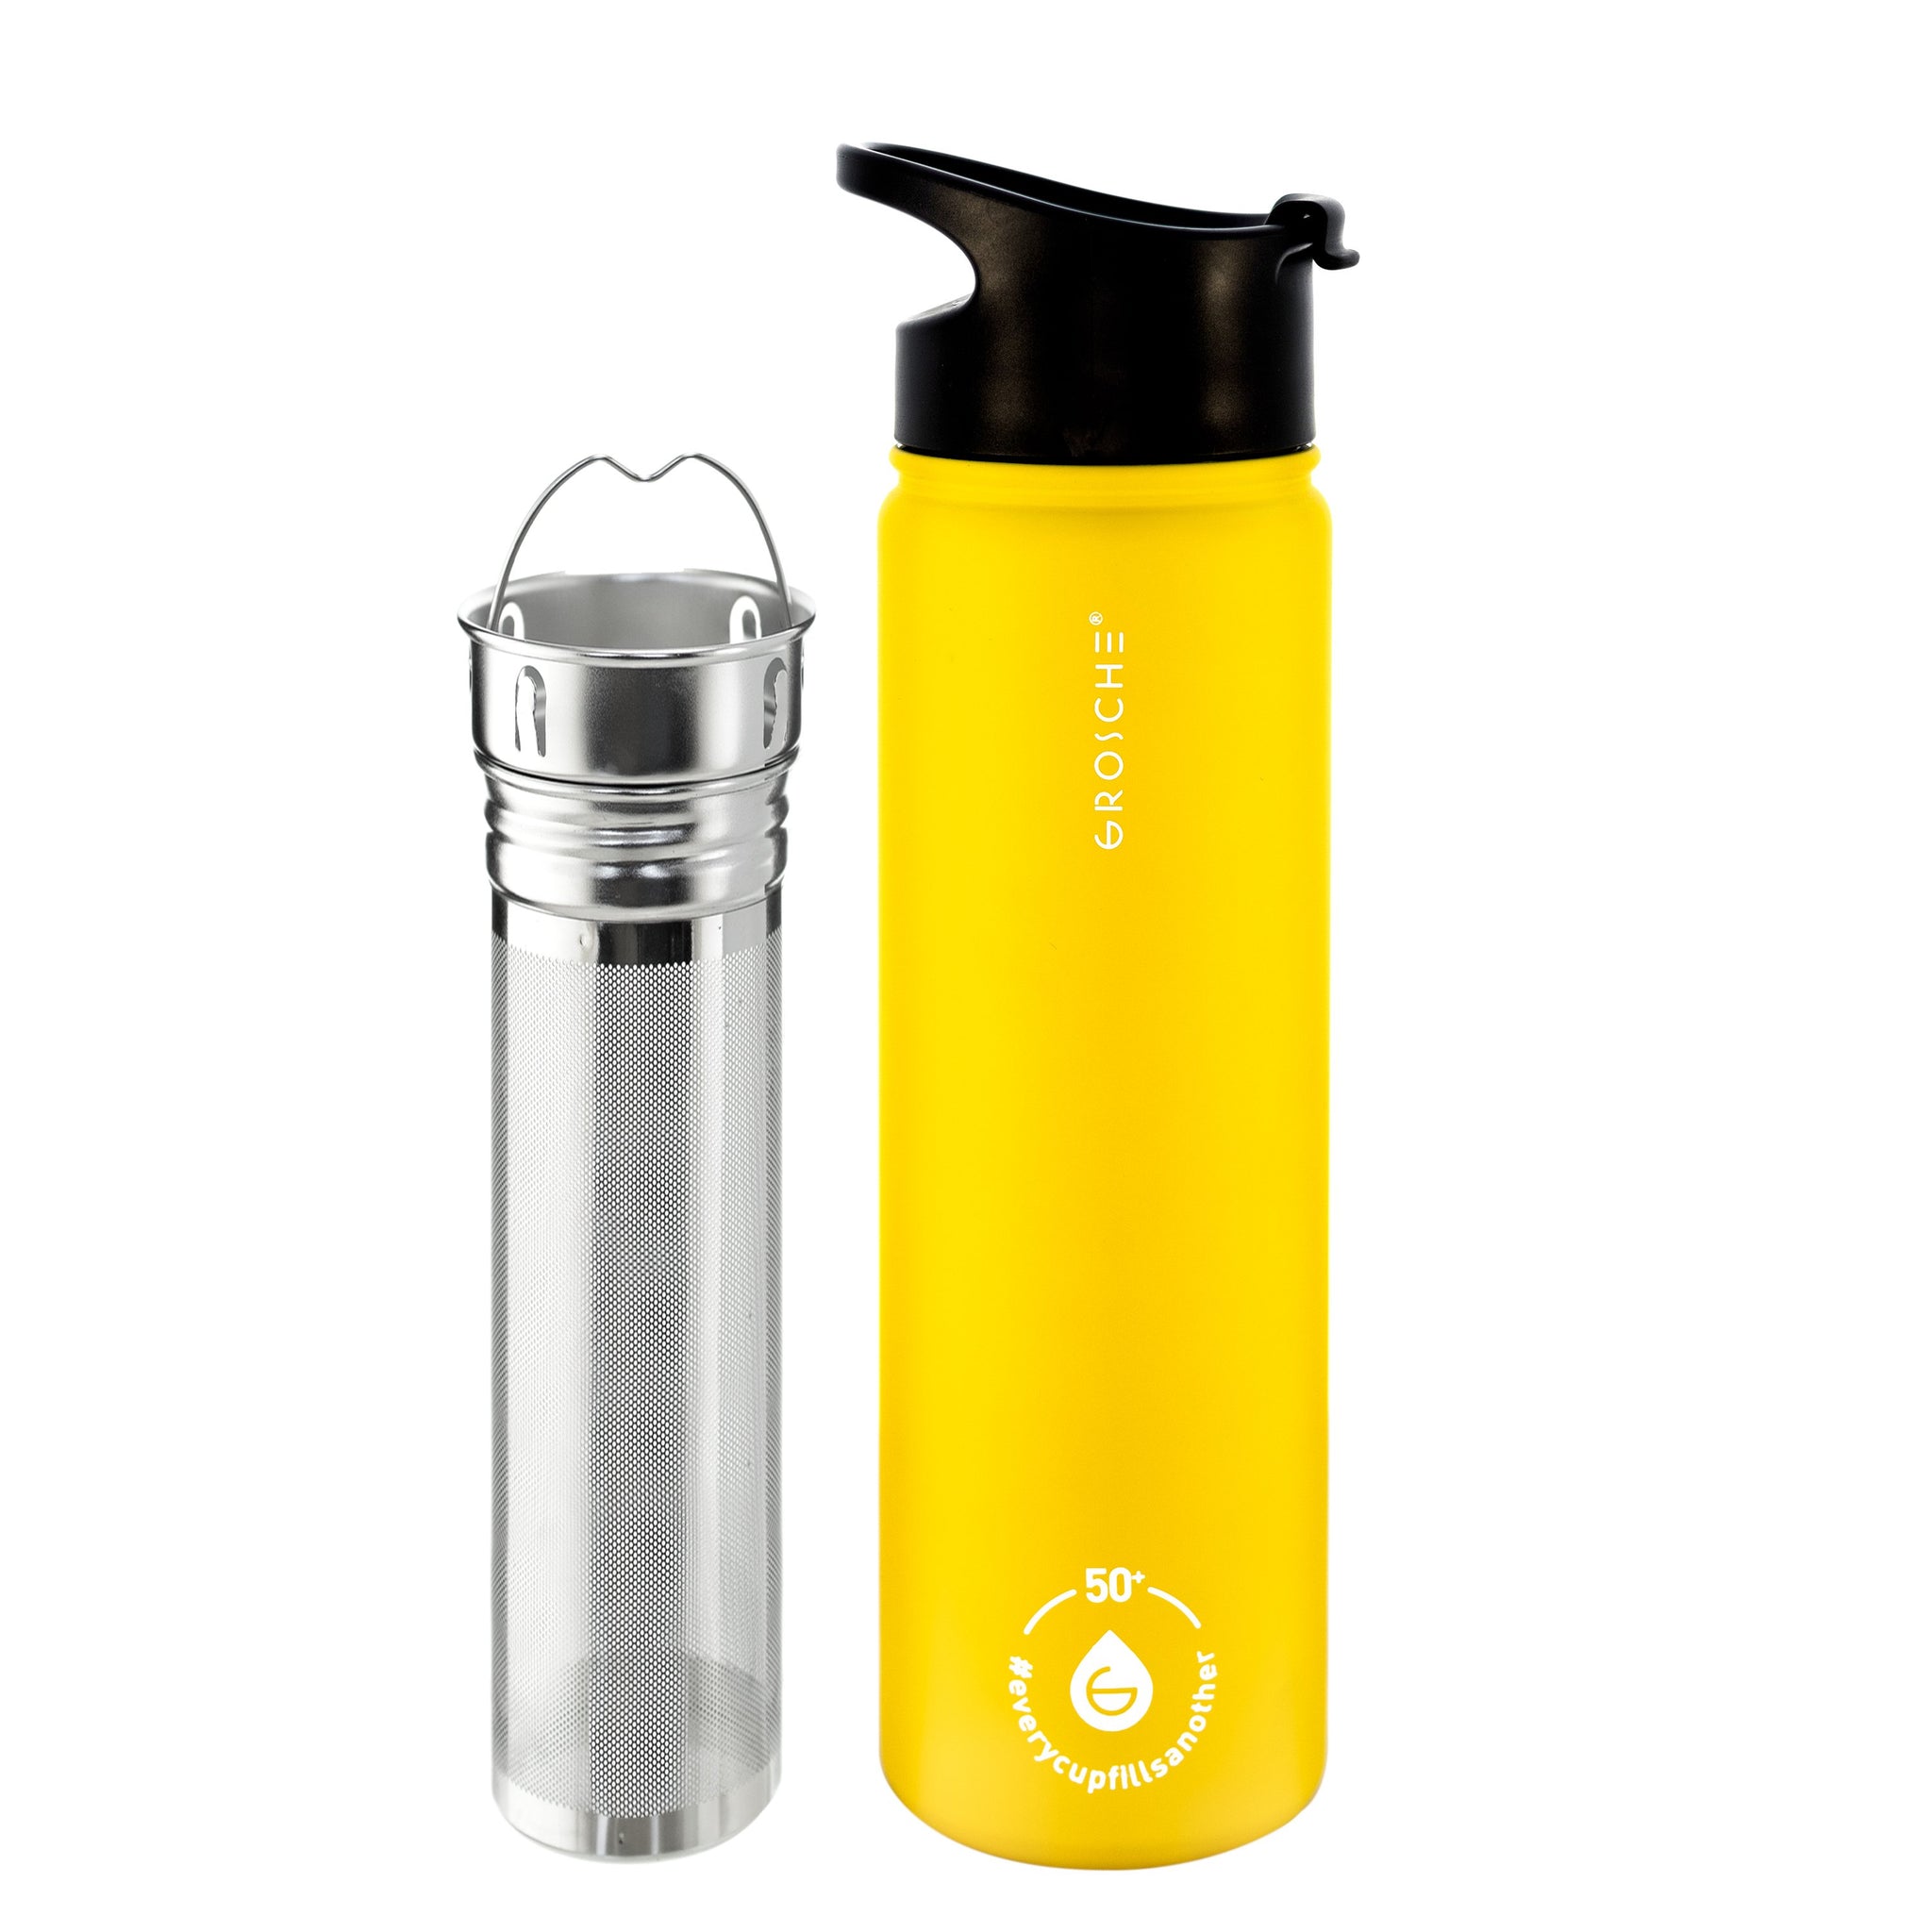 Grosche Chicago Steel Insulated Tea Infusion Flask, Tea And Coffee Tumbler,  32 Fl Oz Capacity - Honey Yellow : Target